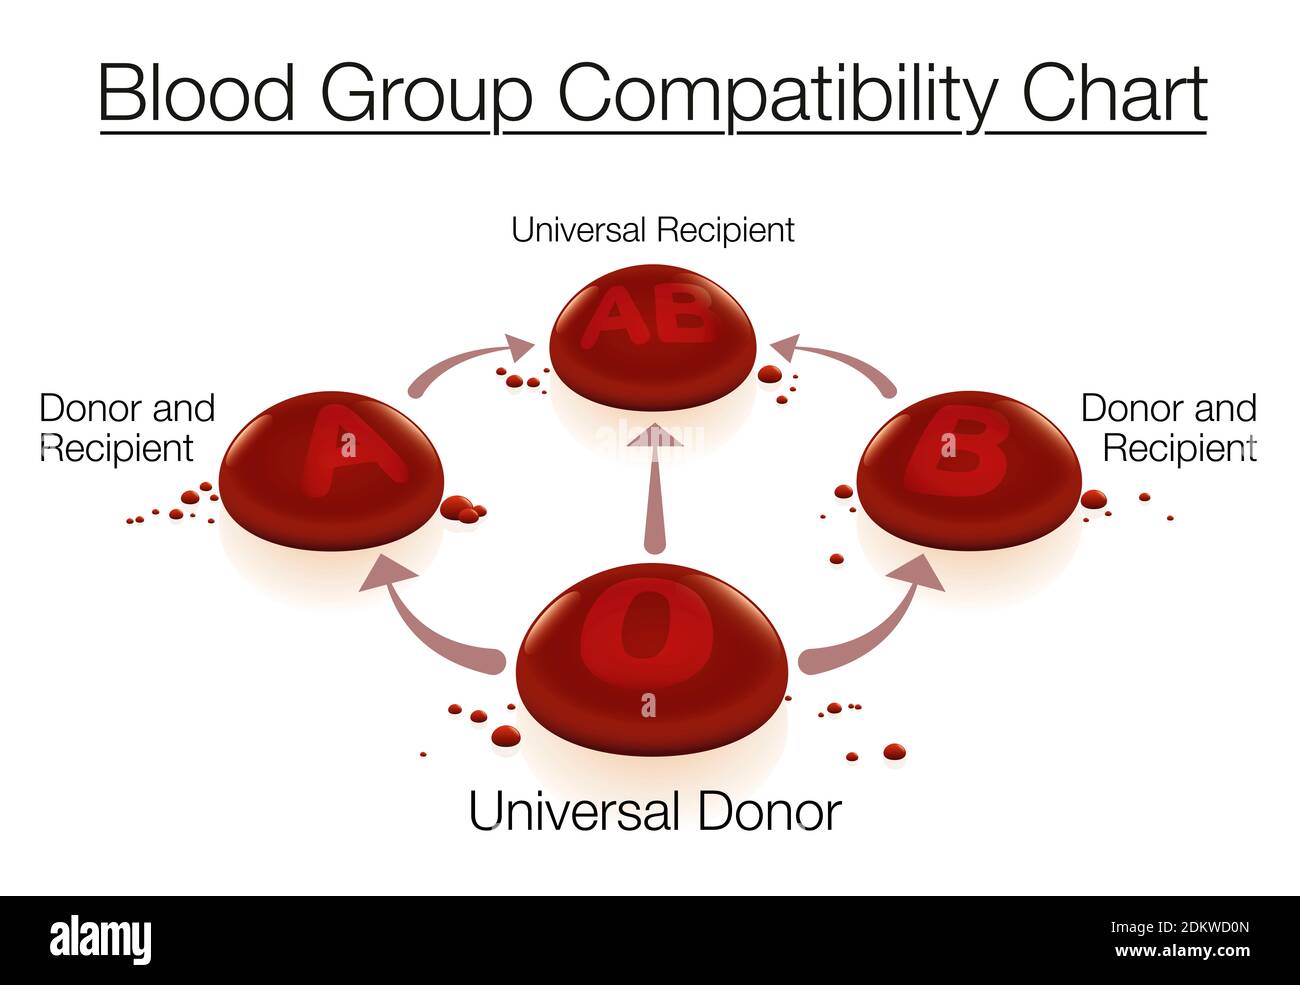 Blood group compatibility chart with universal donor 0 and universal recipient AB - concerning blood donation and transfusion, depicted with arrows. Stock Photo